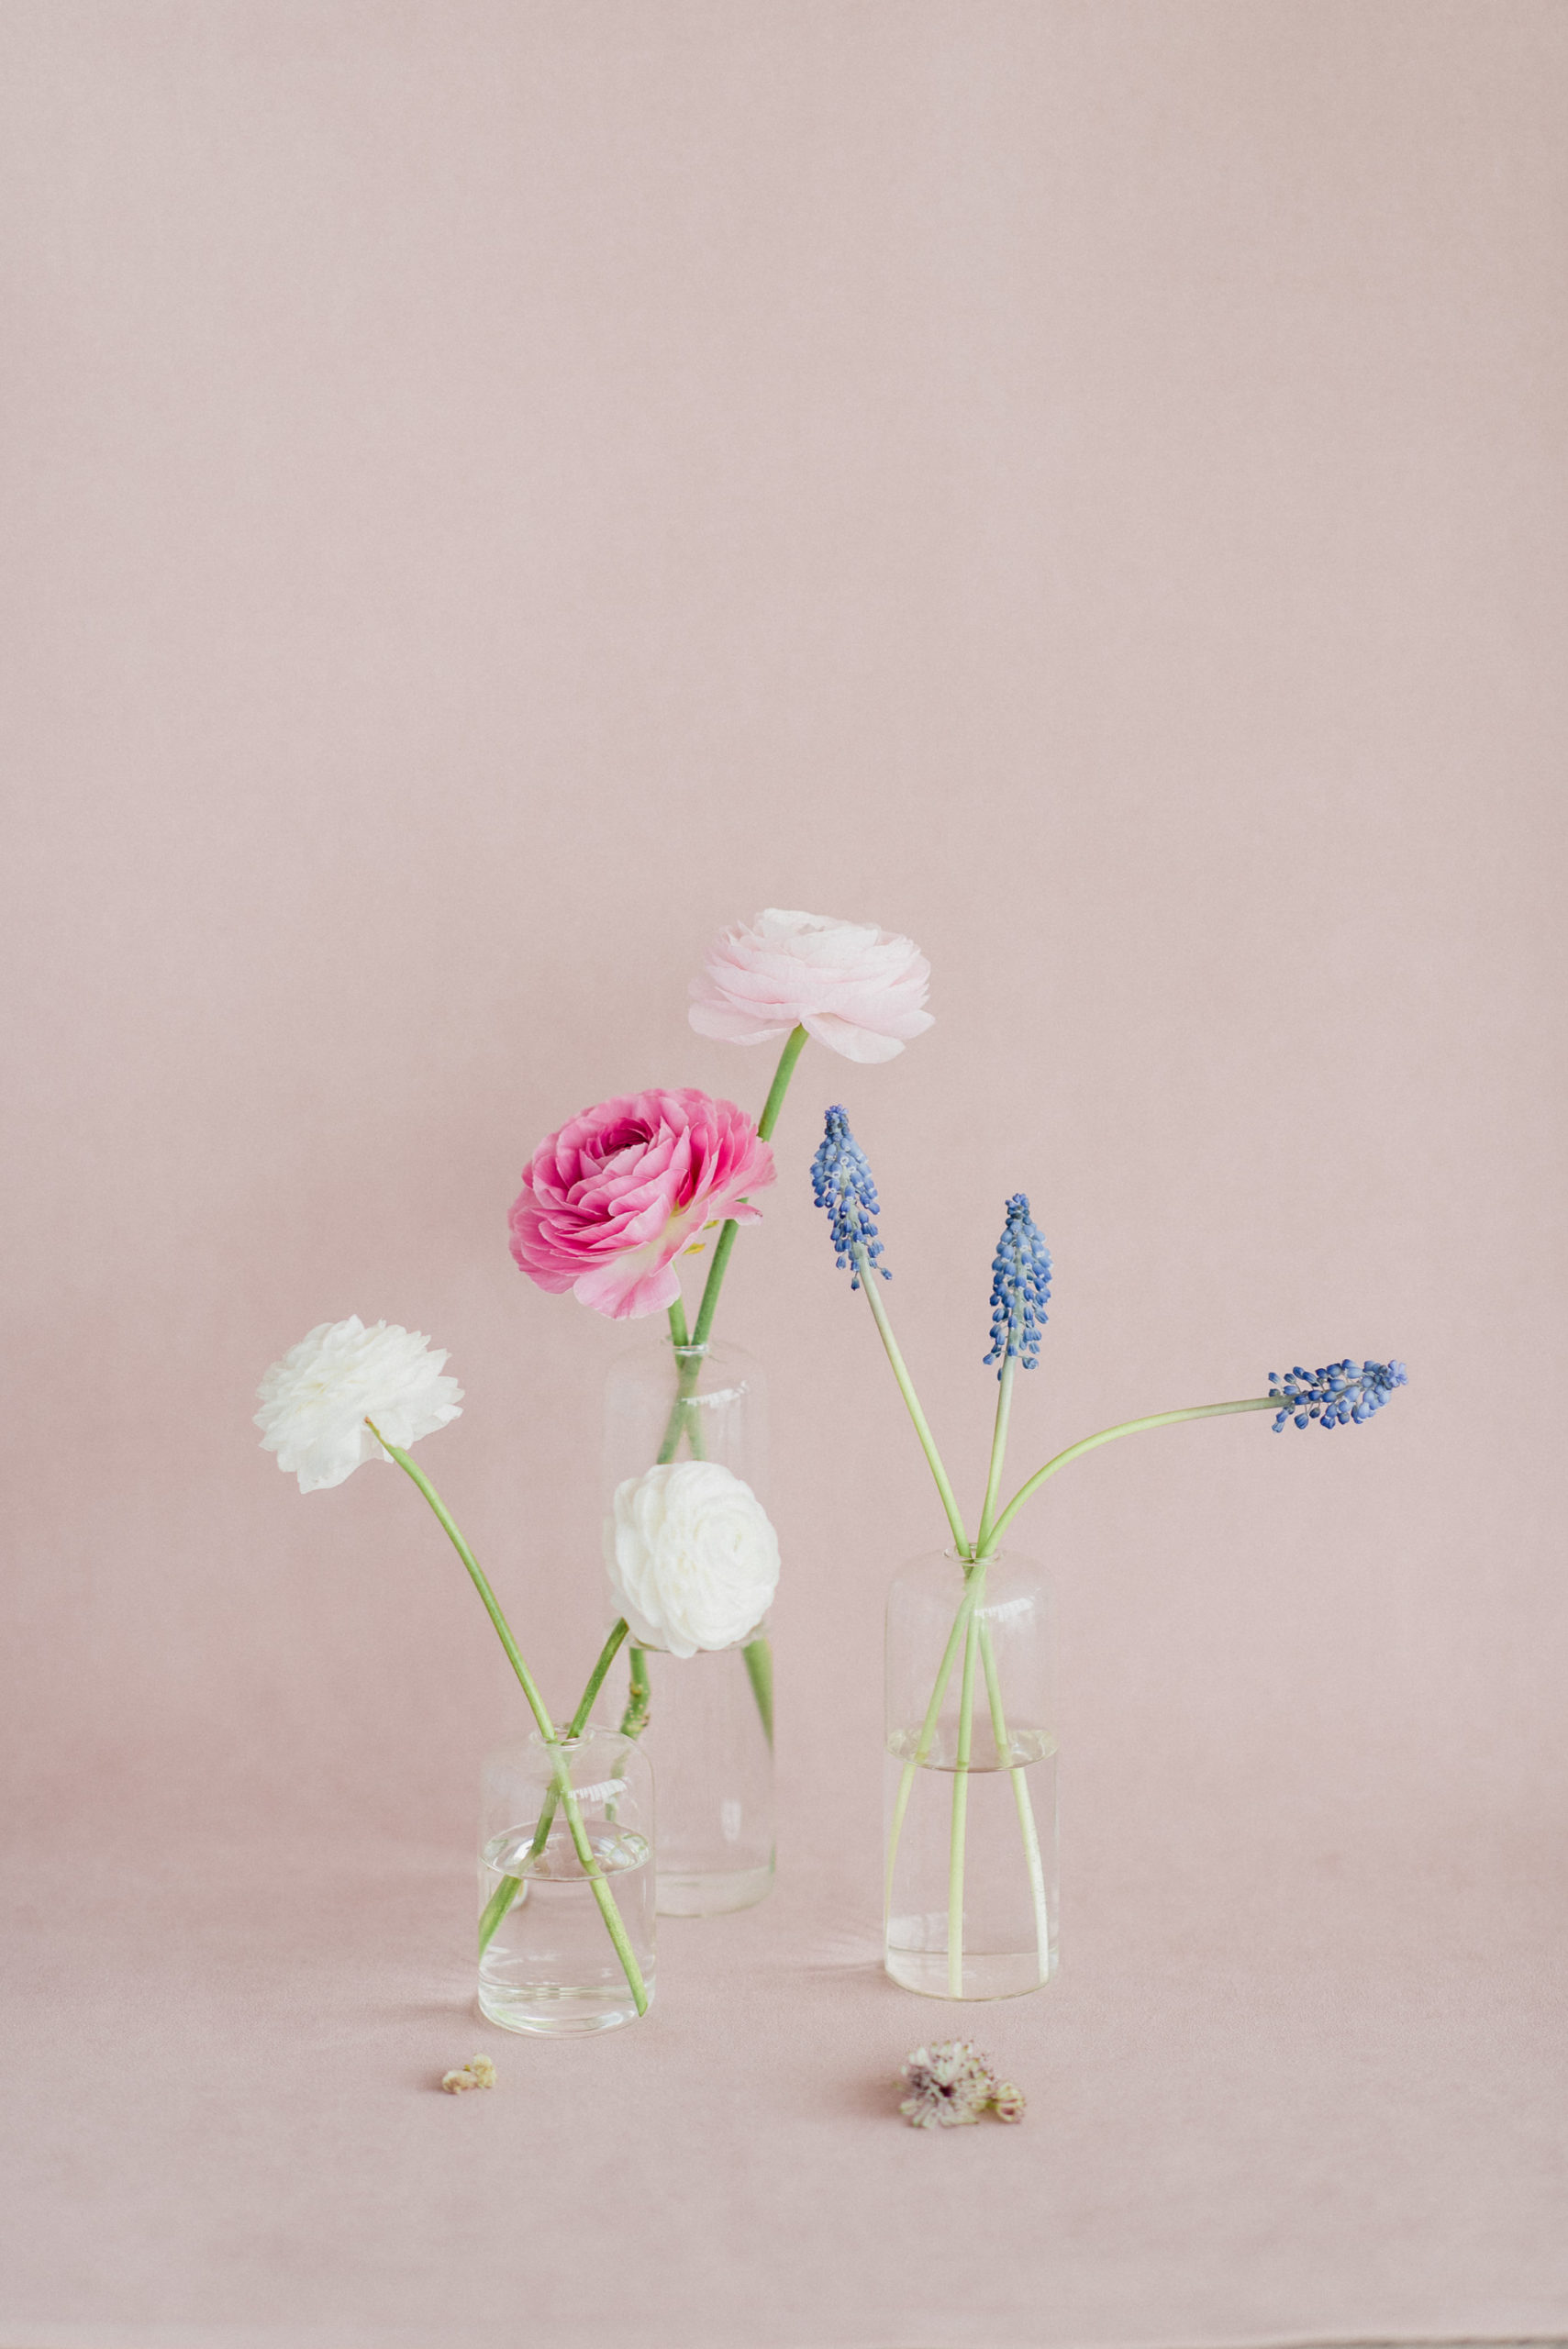 Colourful and bright florals by Quill + Oak | Jenn Kavanagh Photography